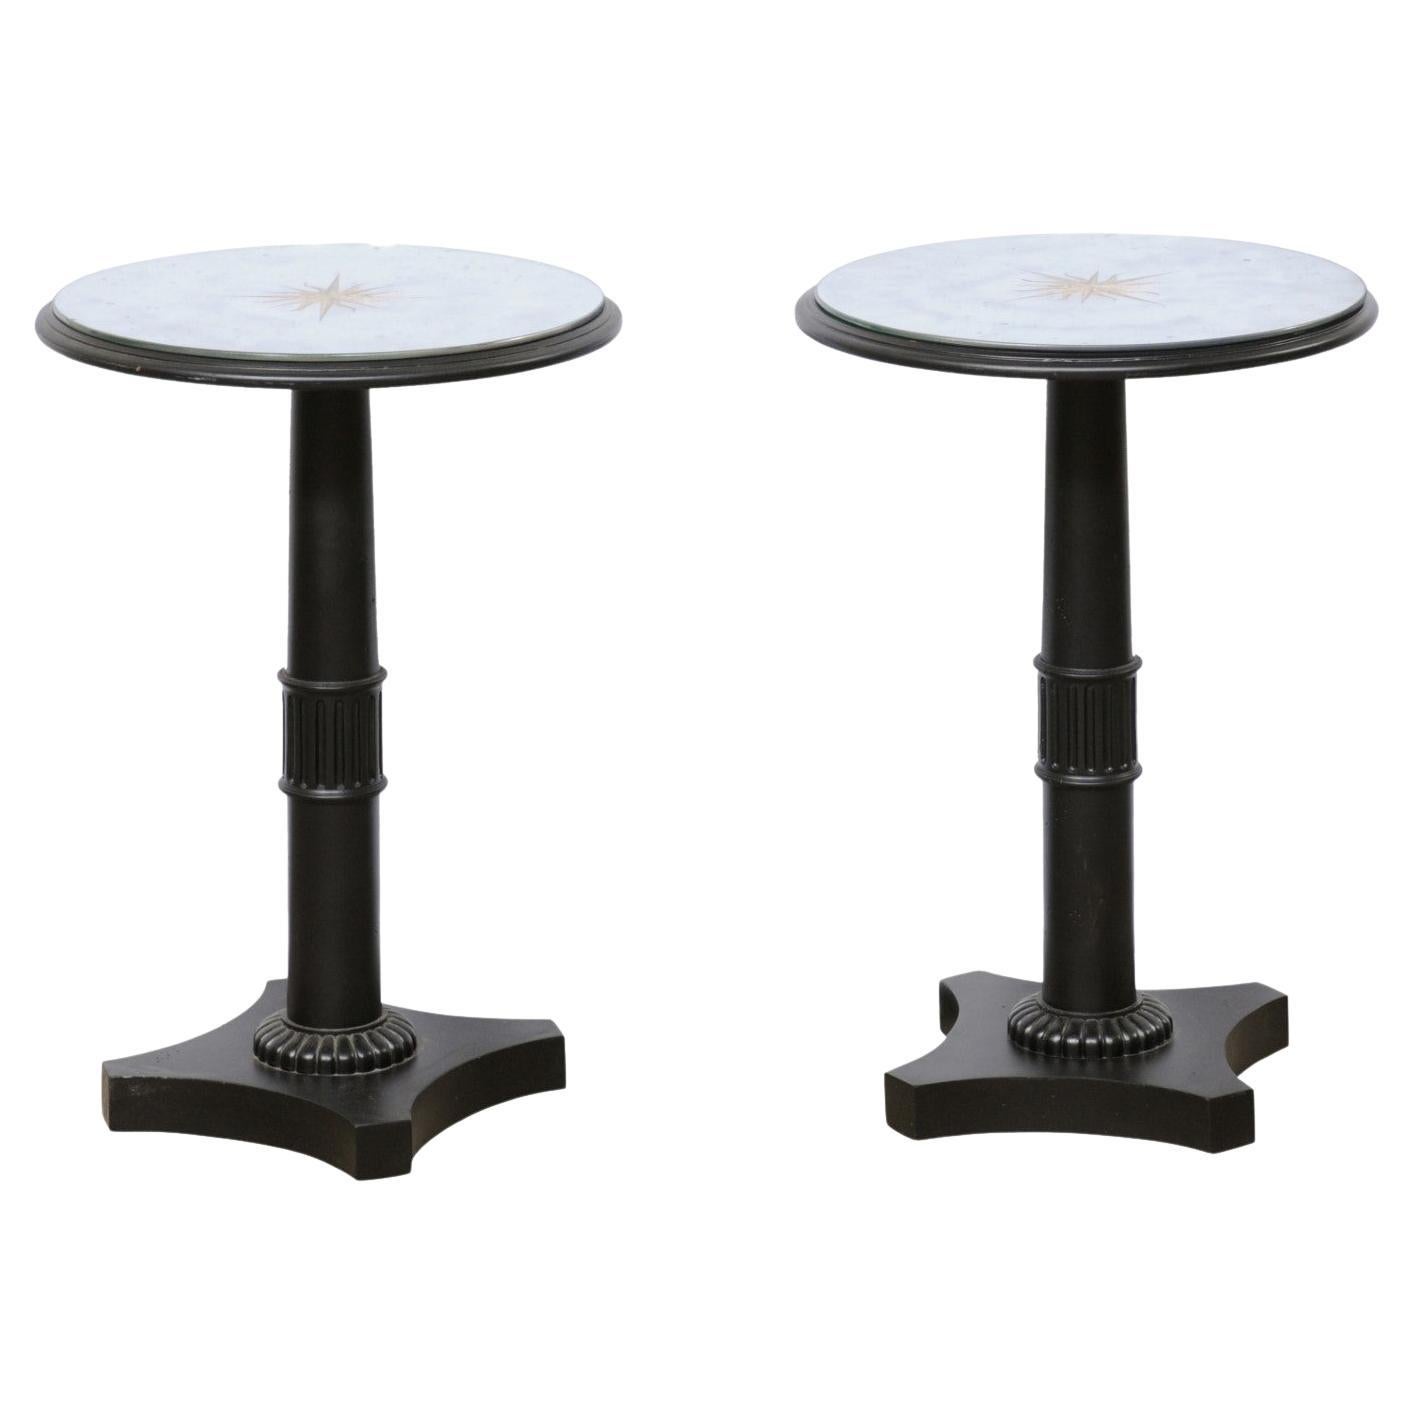 Pair French Pedestal Side Tables W/ Artisan-Crafted Gold Starburst Mirror Tops